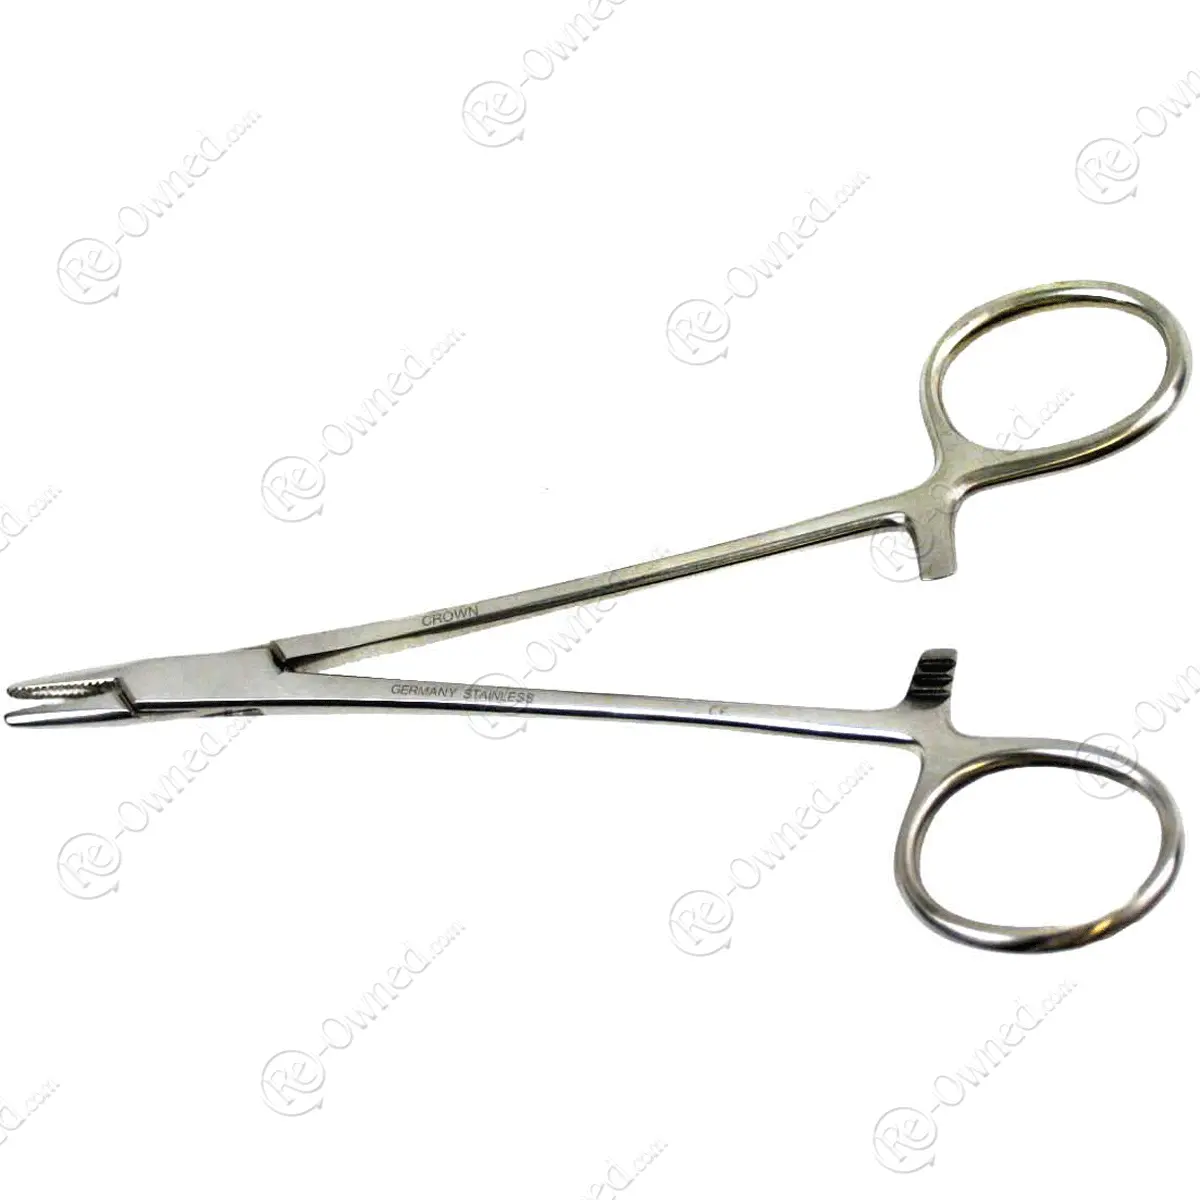 Surgi-OR Collier Needle Holder